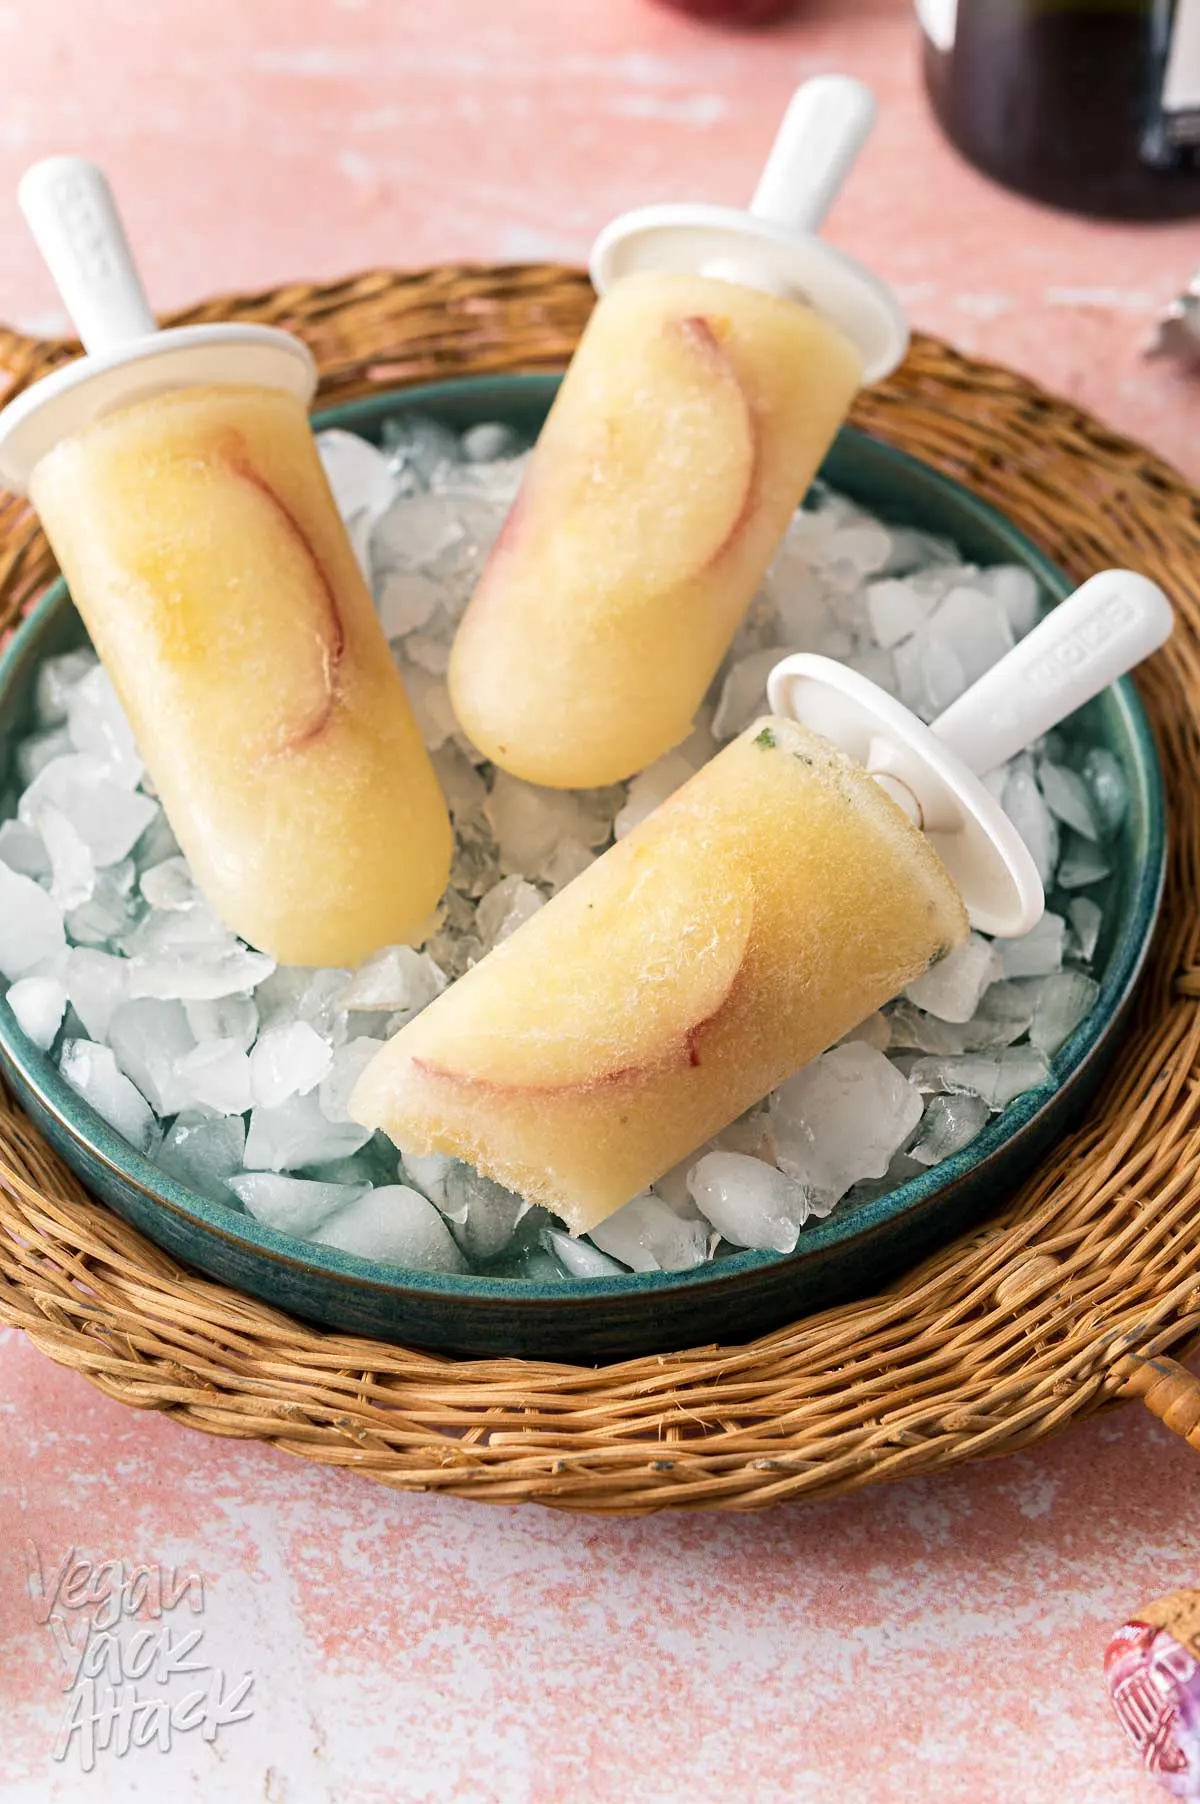 Wicker tray holding three peach Bellini popsicles on a pink table